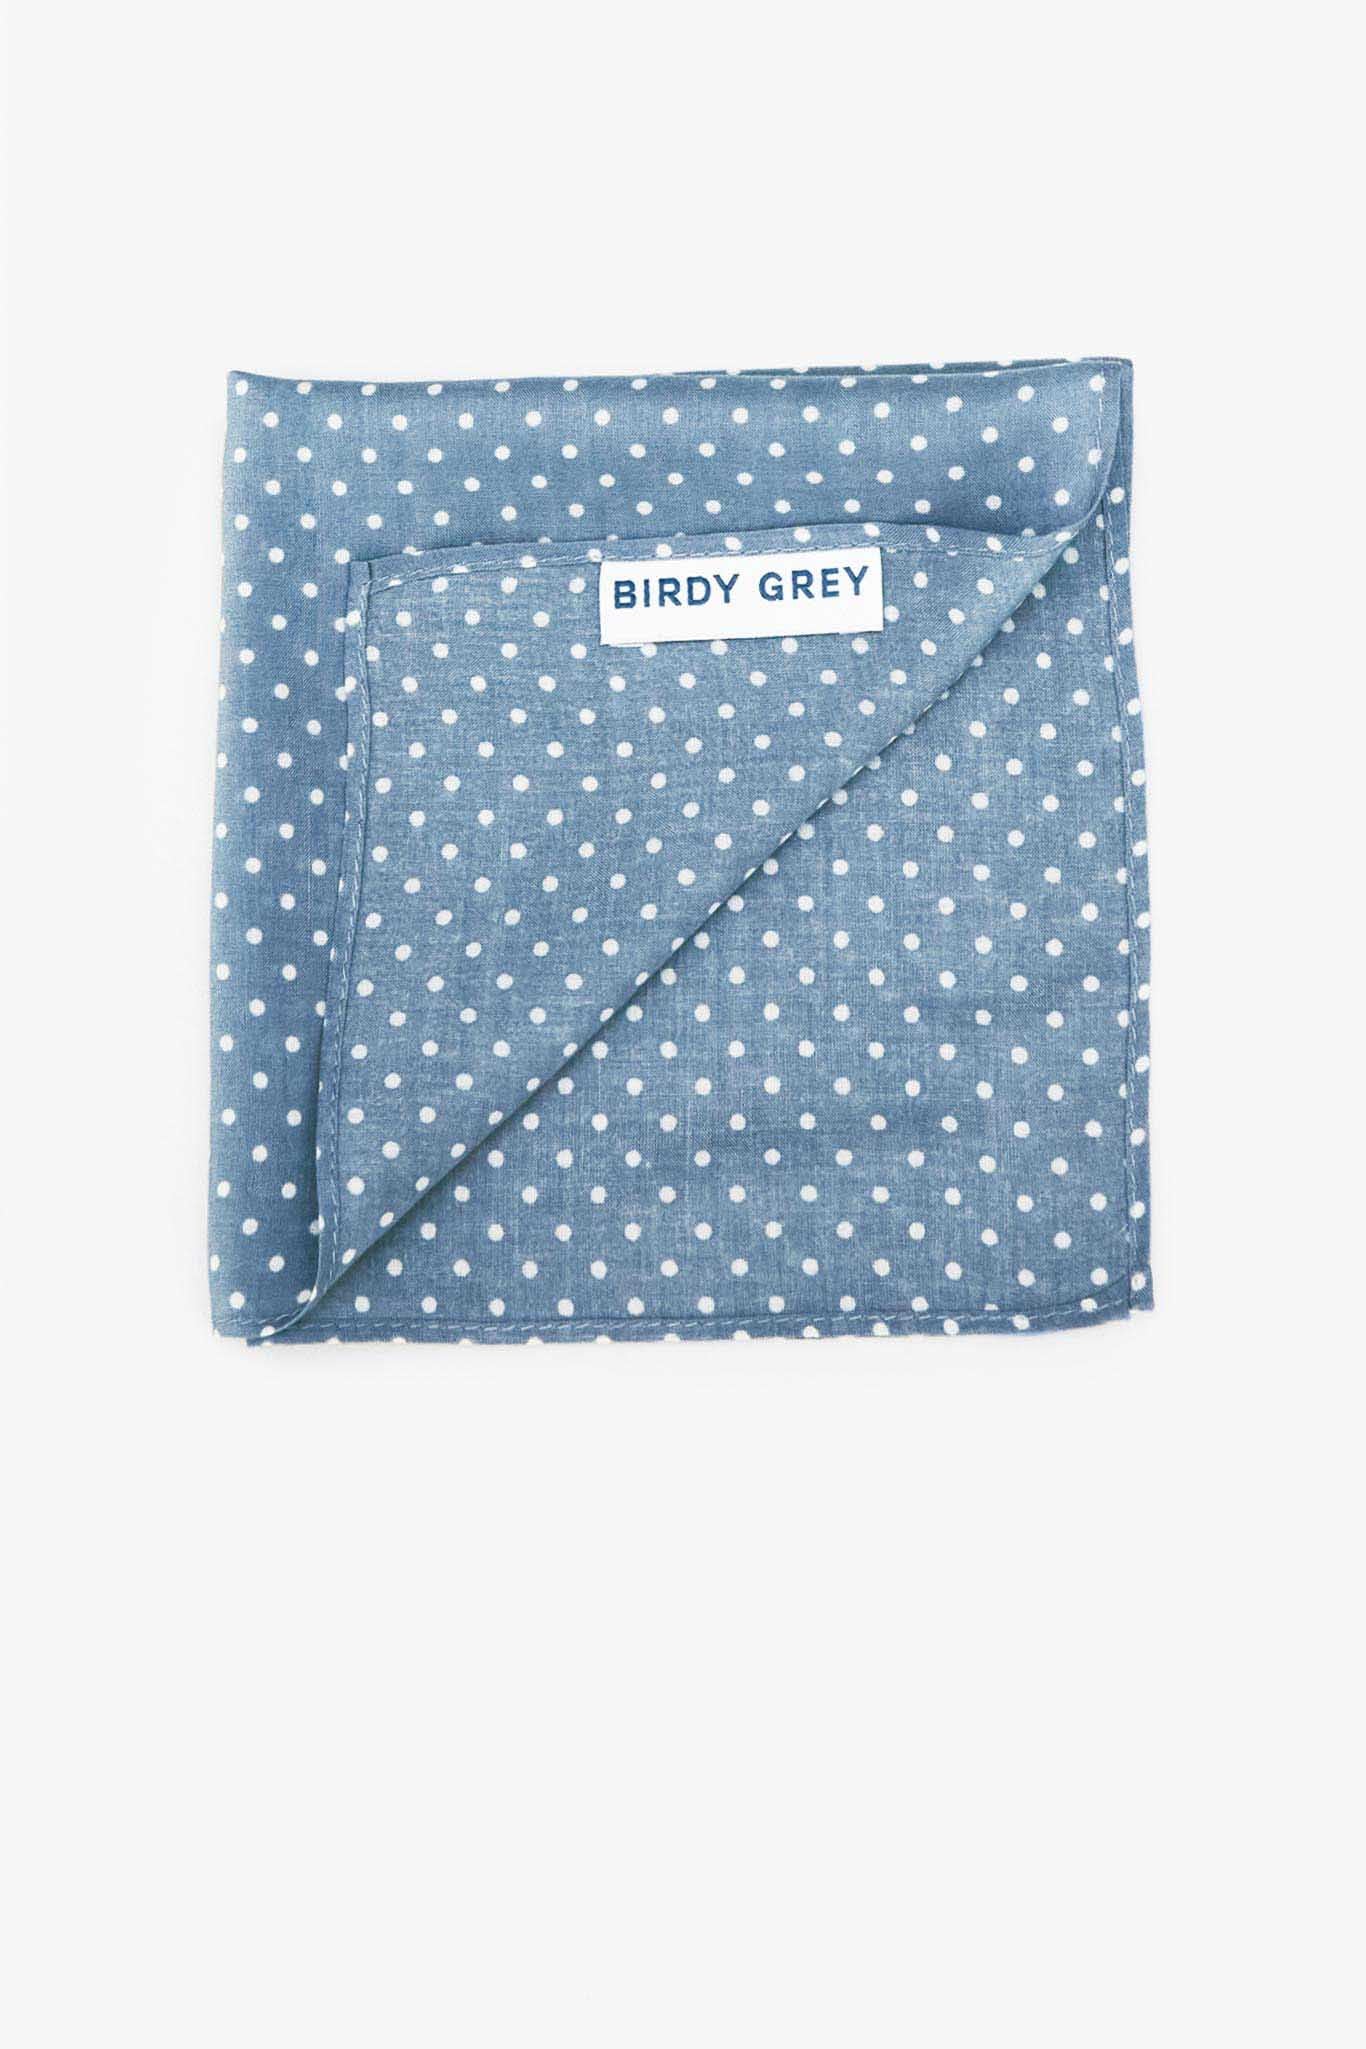 Medium Blue Groomsmen pocket square with white dots with birdy grey label showing